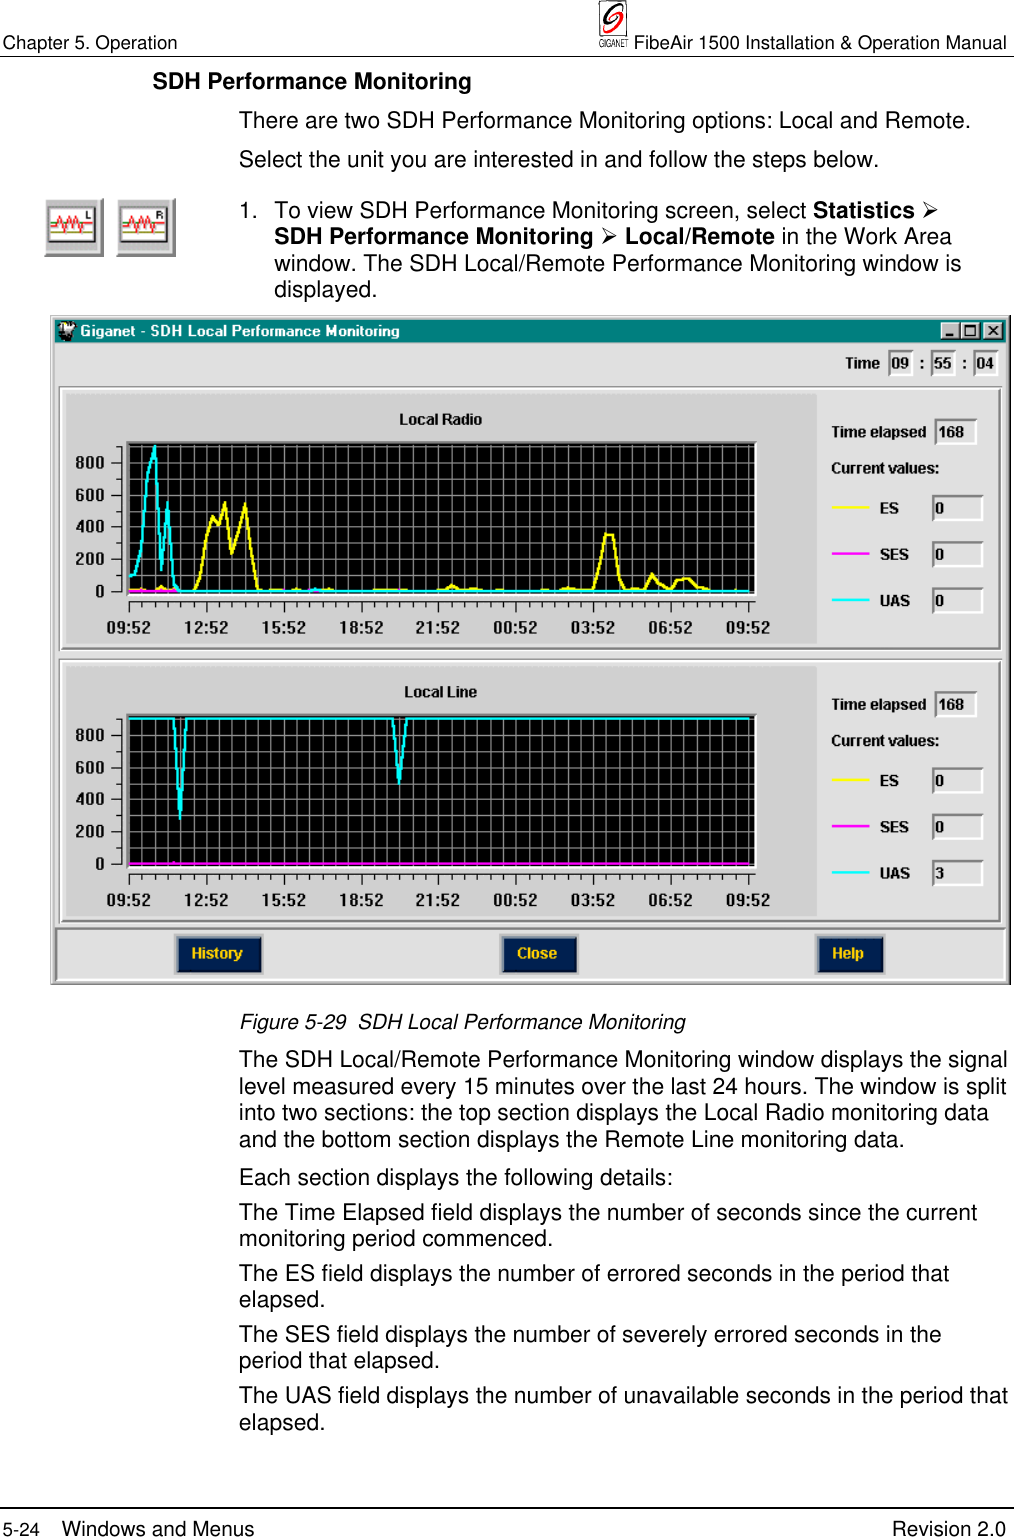 Chapter 5. Operation  FibeAir 1500 Installation &amp; Operation Manual5-24 Windows and Menus Revision 2.0  SDH Performance MonitoringThere are two SDH Performance Monitoring options: Local and Remote.Select the unit you are interested in and follow the steps below.  1. To view SDH Performance Monitoring screen, select Statistics ½SDH Performance Monitoring ½ Local/Remote in the Work Areawindow. The SDH Local/Remote Performance Monitoring window isdisplayed.Figure 5-29  SDH Local Performance MonitoringThe SDH Local/Remote Performance Monitoring window displays the signallevel measured every 15 minutes over the last 24 hours. The window is splitinto two sections: the top section displays the Local Radio monitoring dataand the bottom section displays the Remote Line monitoring data.Each section displays the following details:The Time Elapsed field displays the number of seconds since the currentmonitoring period commenced.The ES field displays the number of errored seconds in the period thatelapsed.The SES field displays the number of severely errored seconds in theperiod that elapsed.The UAS field displays the number of unavailable seconds in the period thatelapsed.